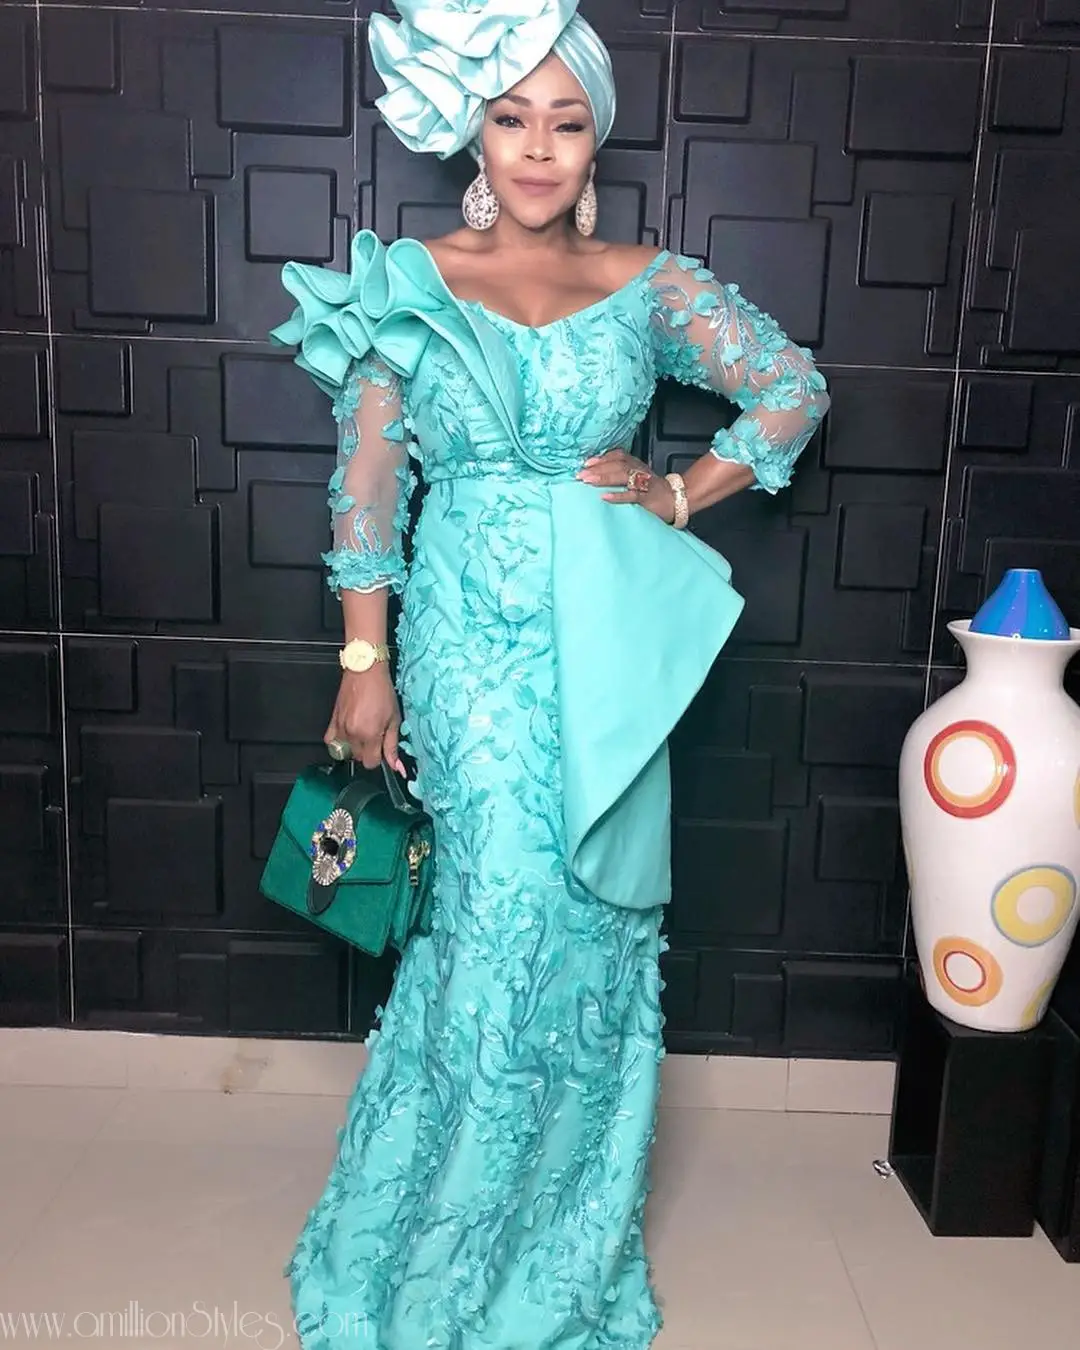 What Are The Chances You Have Come Across These Sleek Asoebi Styles?